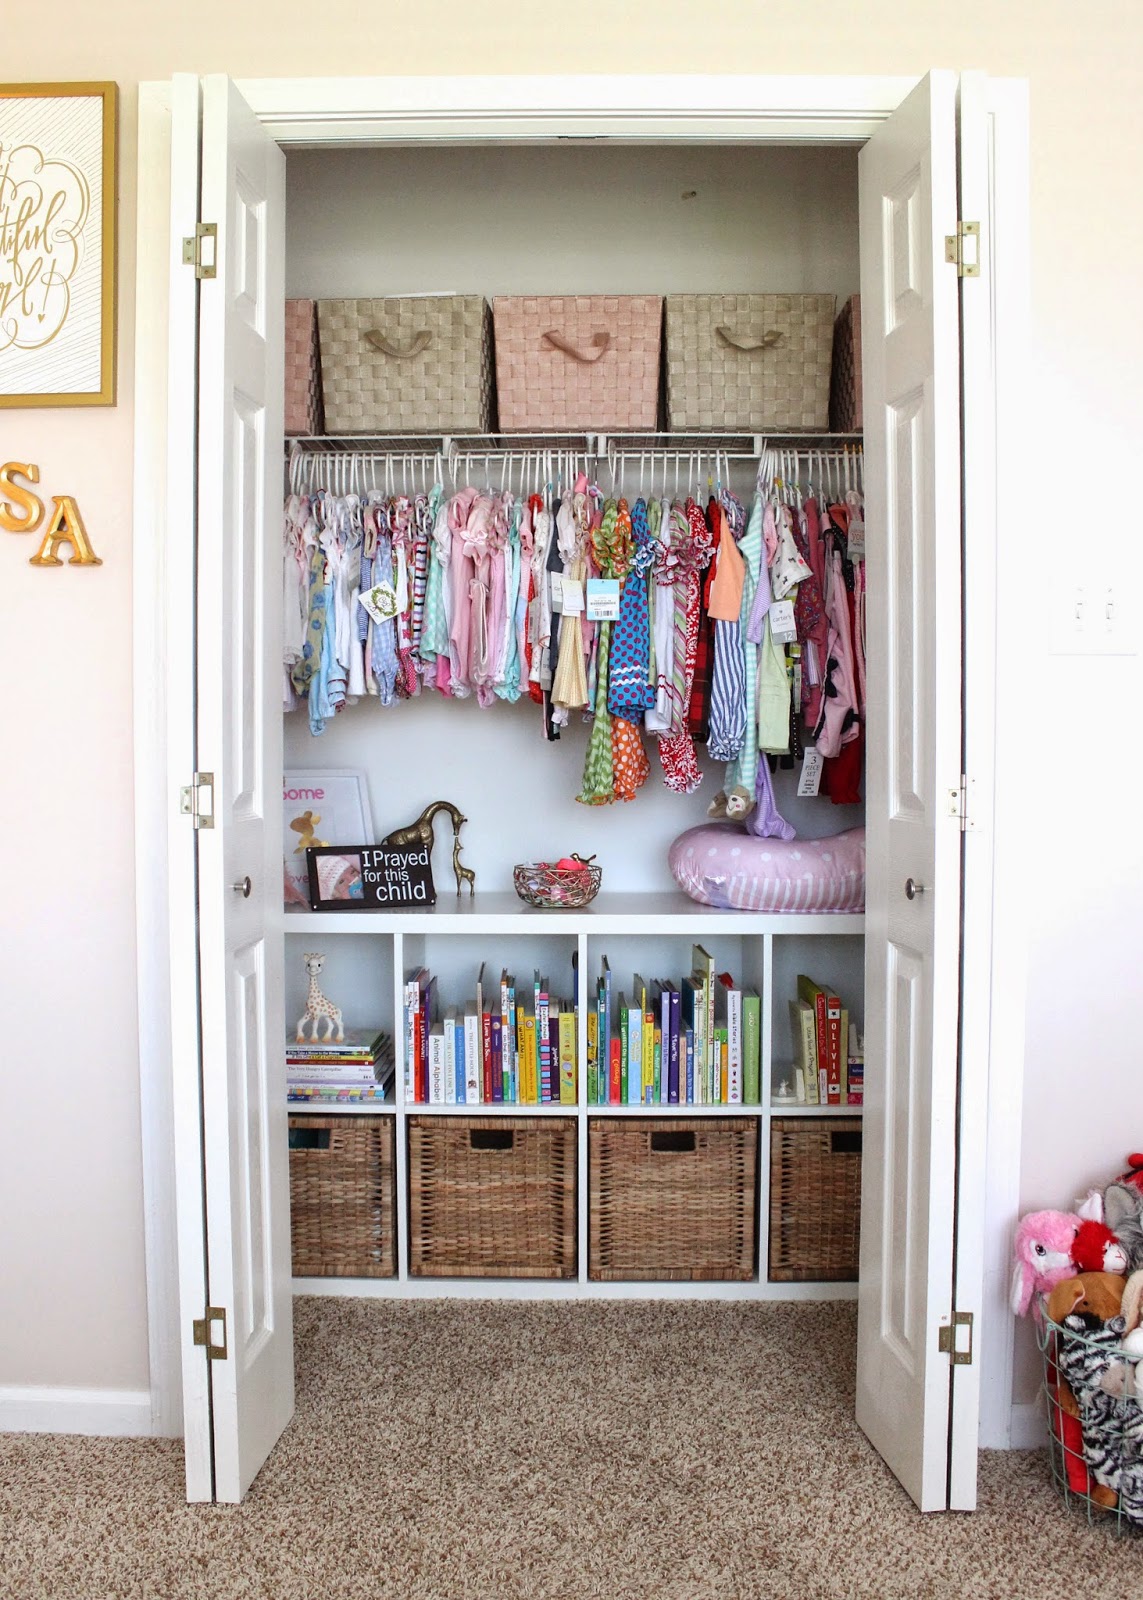 Fantastic Ideas for Organizing Kid's Bedrooms | The Happy ...